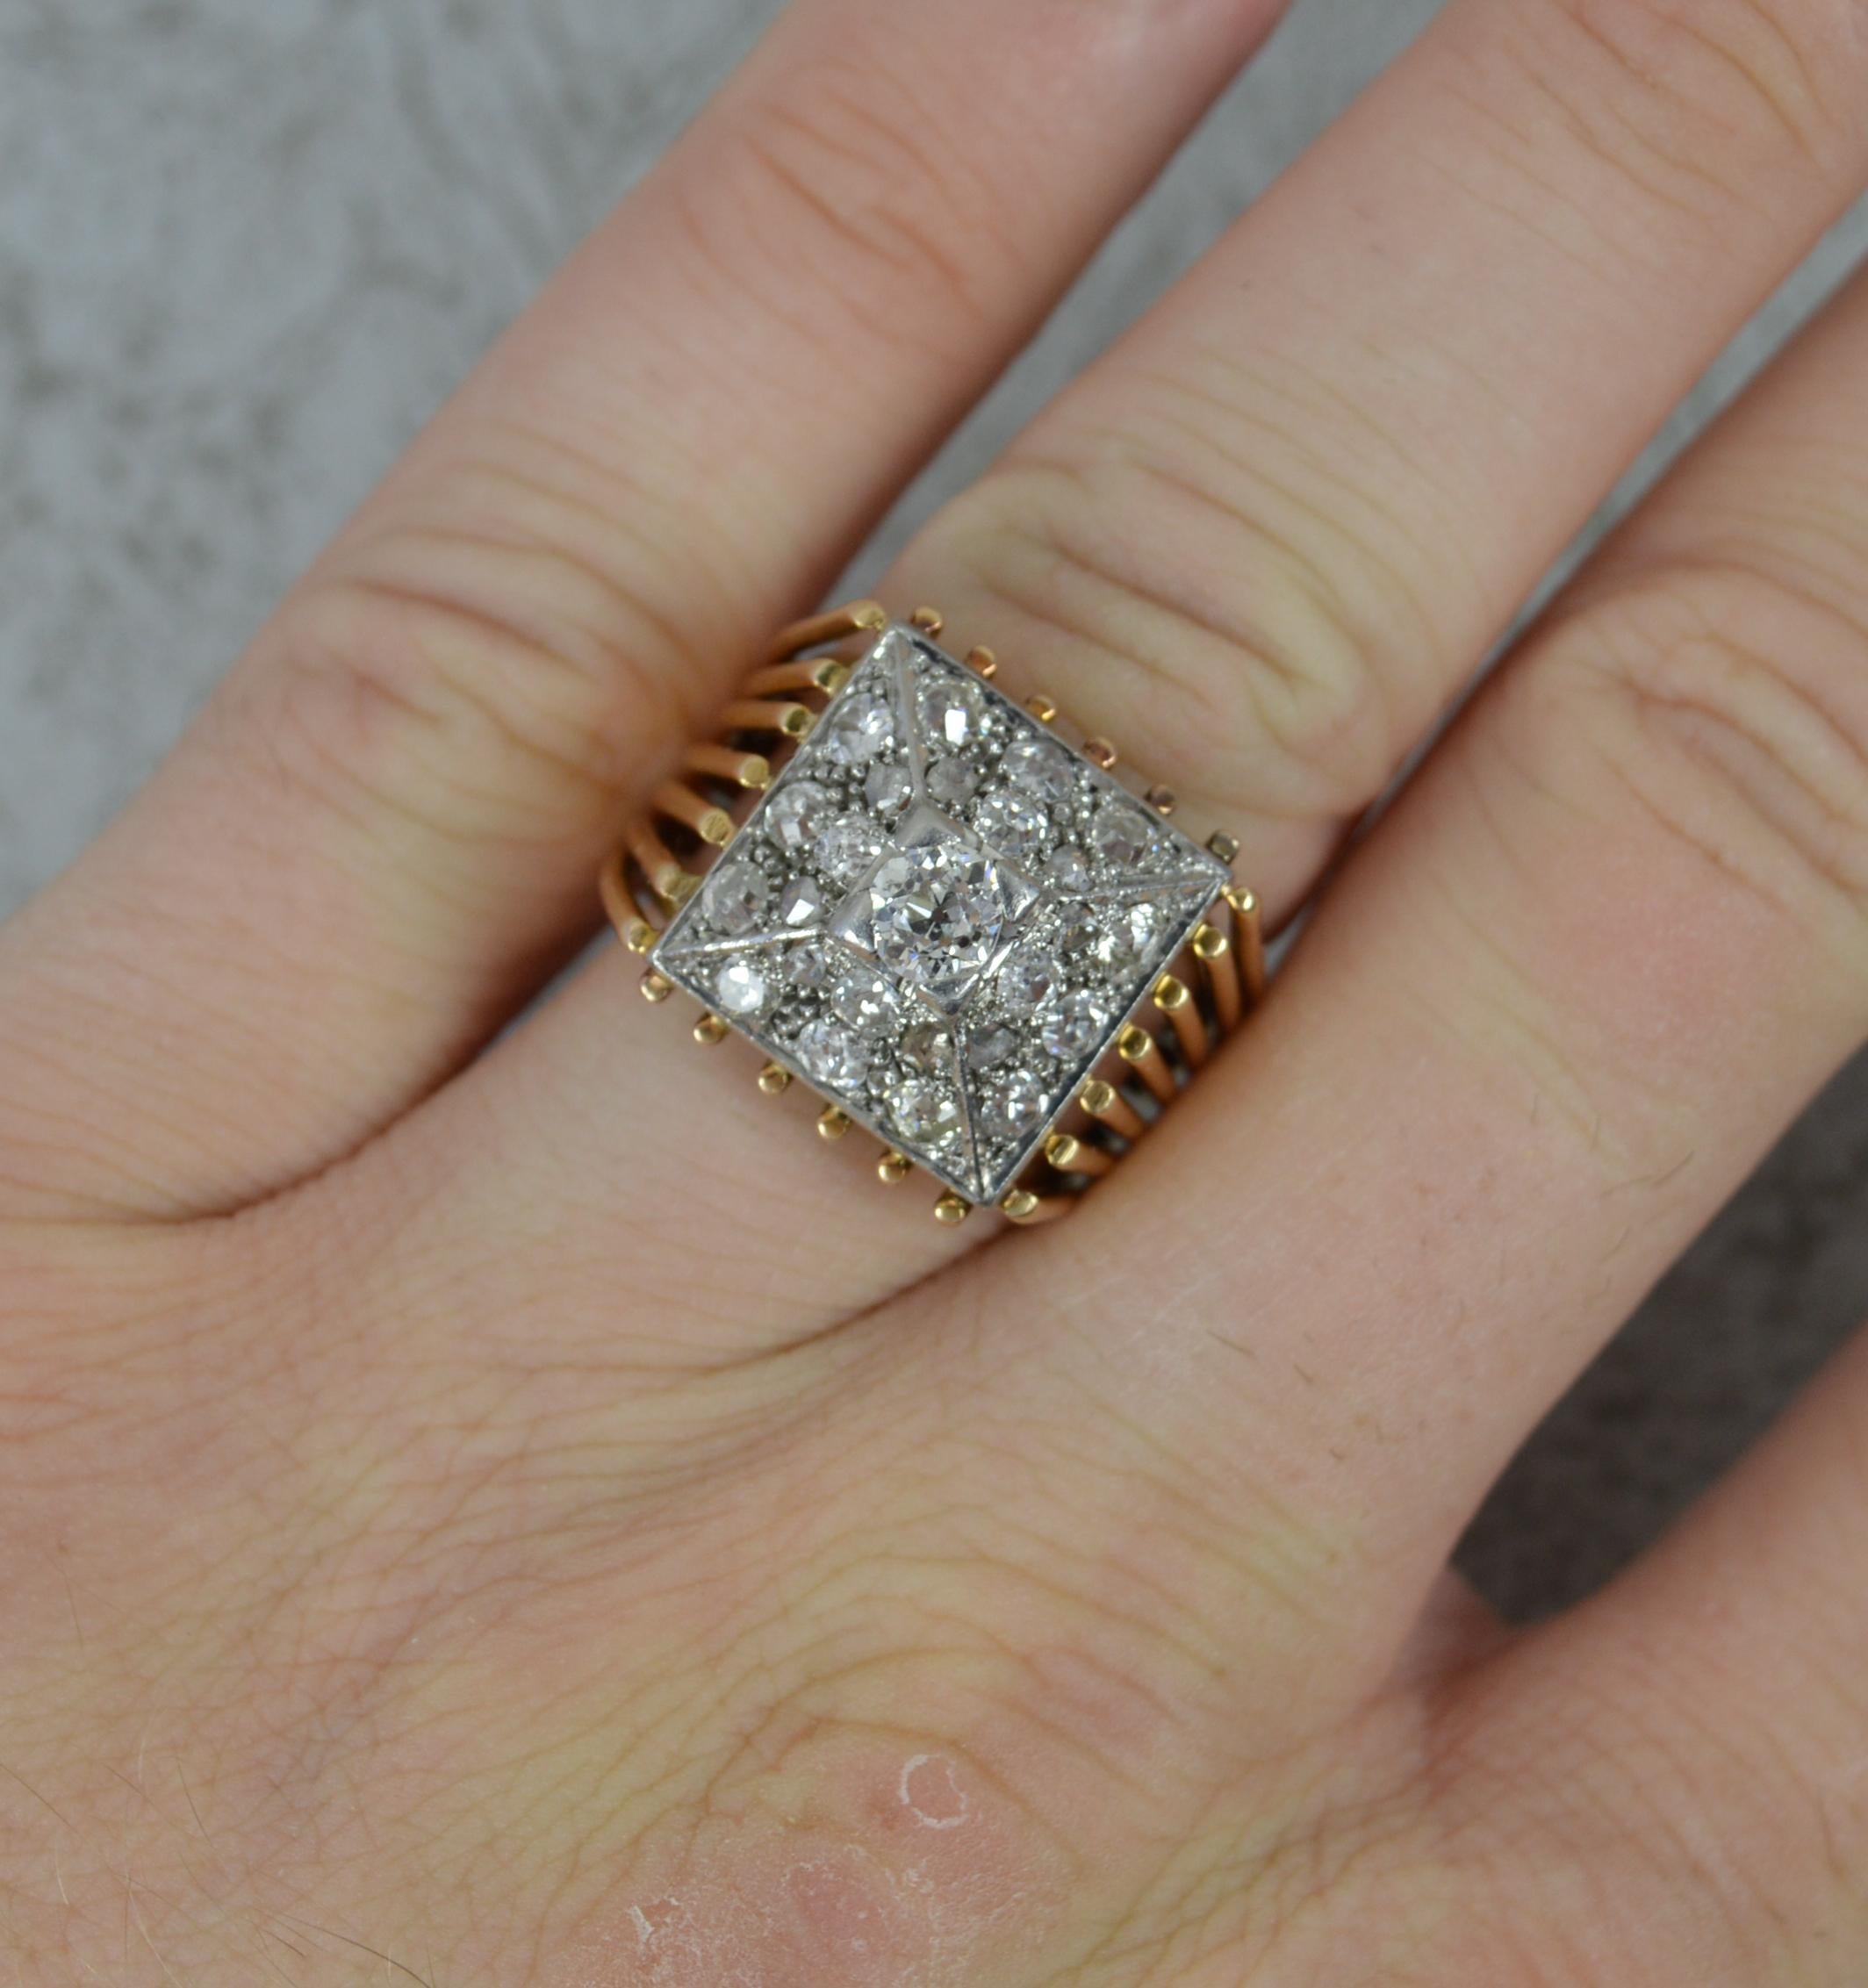 A superb antique diamond cluster ring, circa 1910/20.
Solid and heavy 18 carat gold example with a platinum head setting.
Designed with a natural old cut diamond to centre and an additional 24 smaller old cut diamonds surrounding in a square shaped